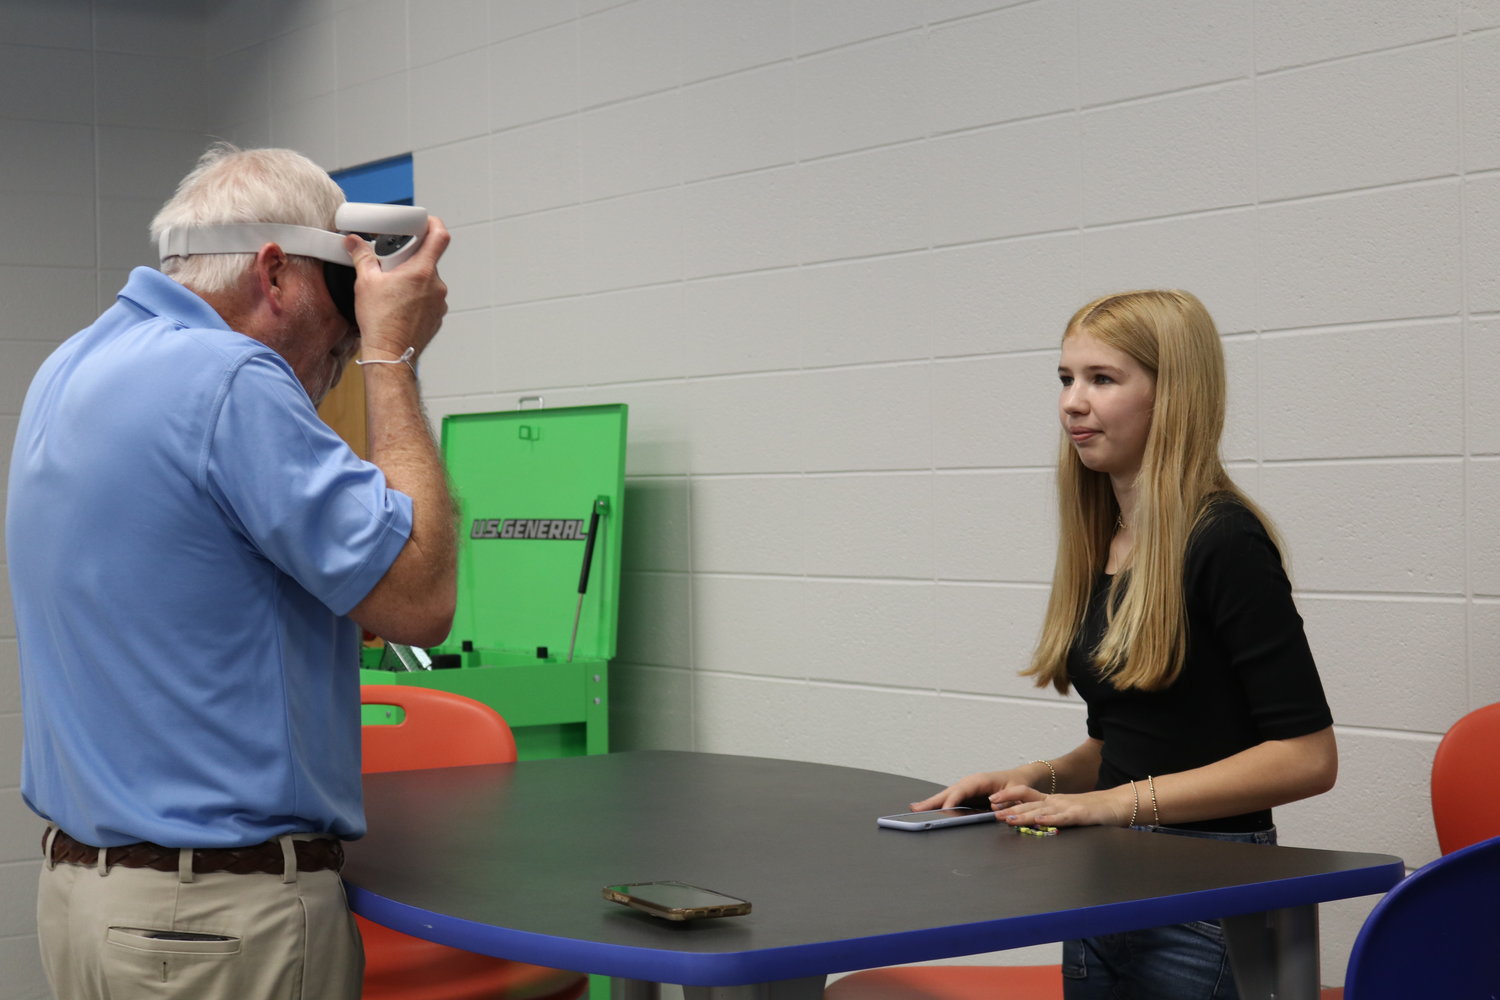 Cookie Grover, Sophia Sobol and Claire Colvin operated the VR station set up within the Dream Lab. The students showed interested attendees how to use the VR equipment and answered questions about the program.